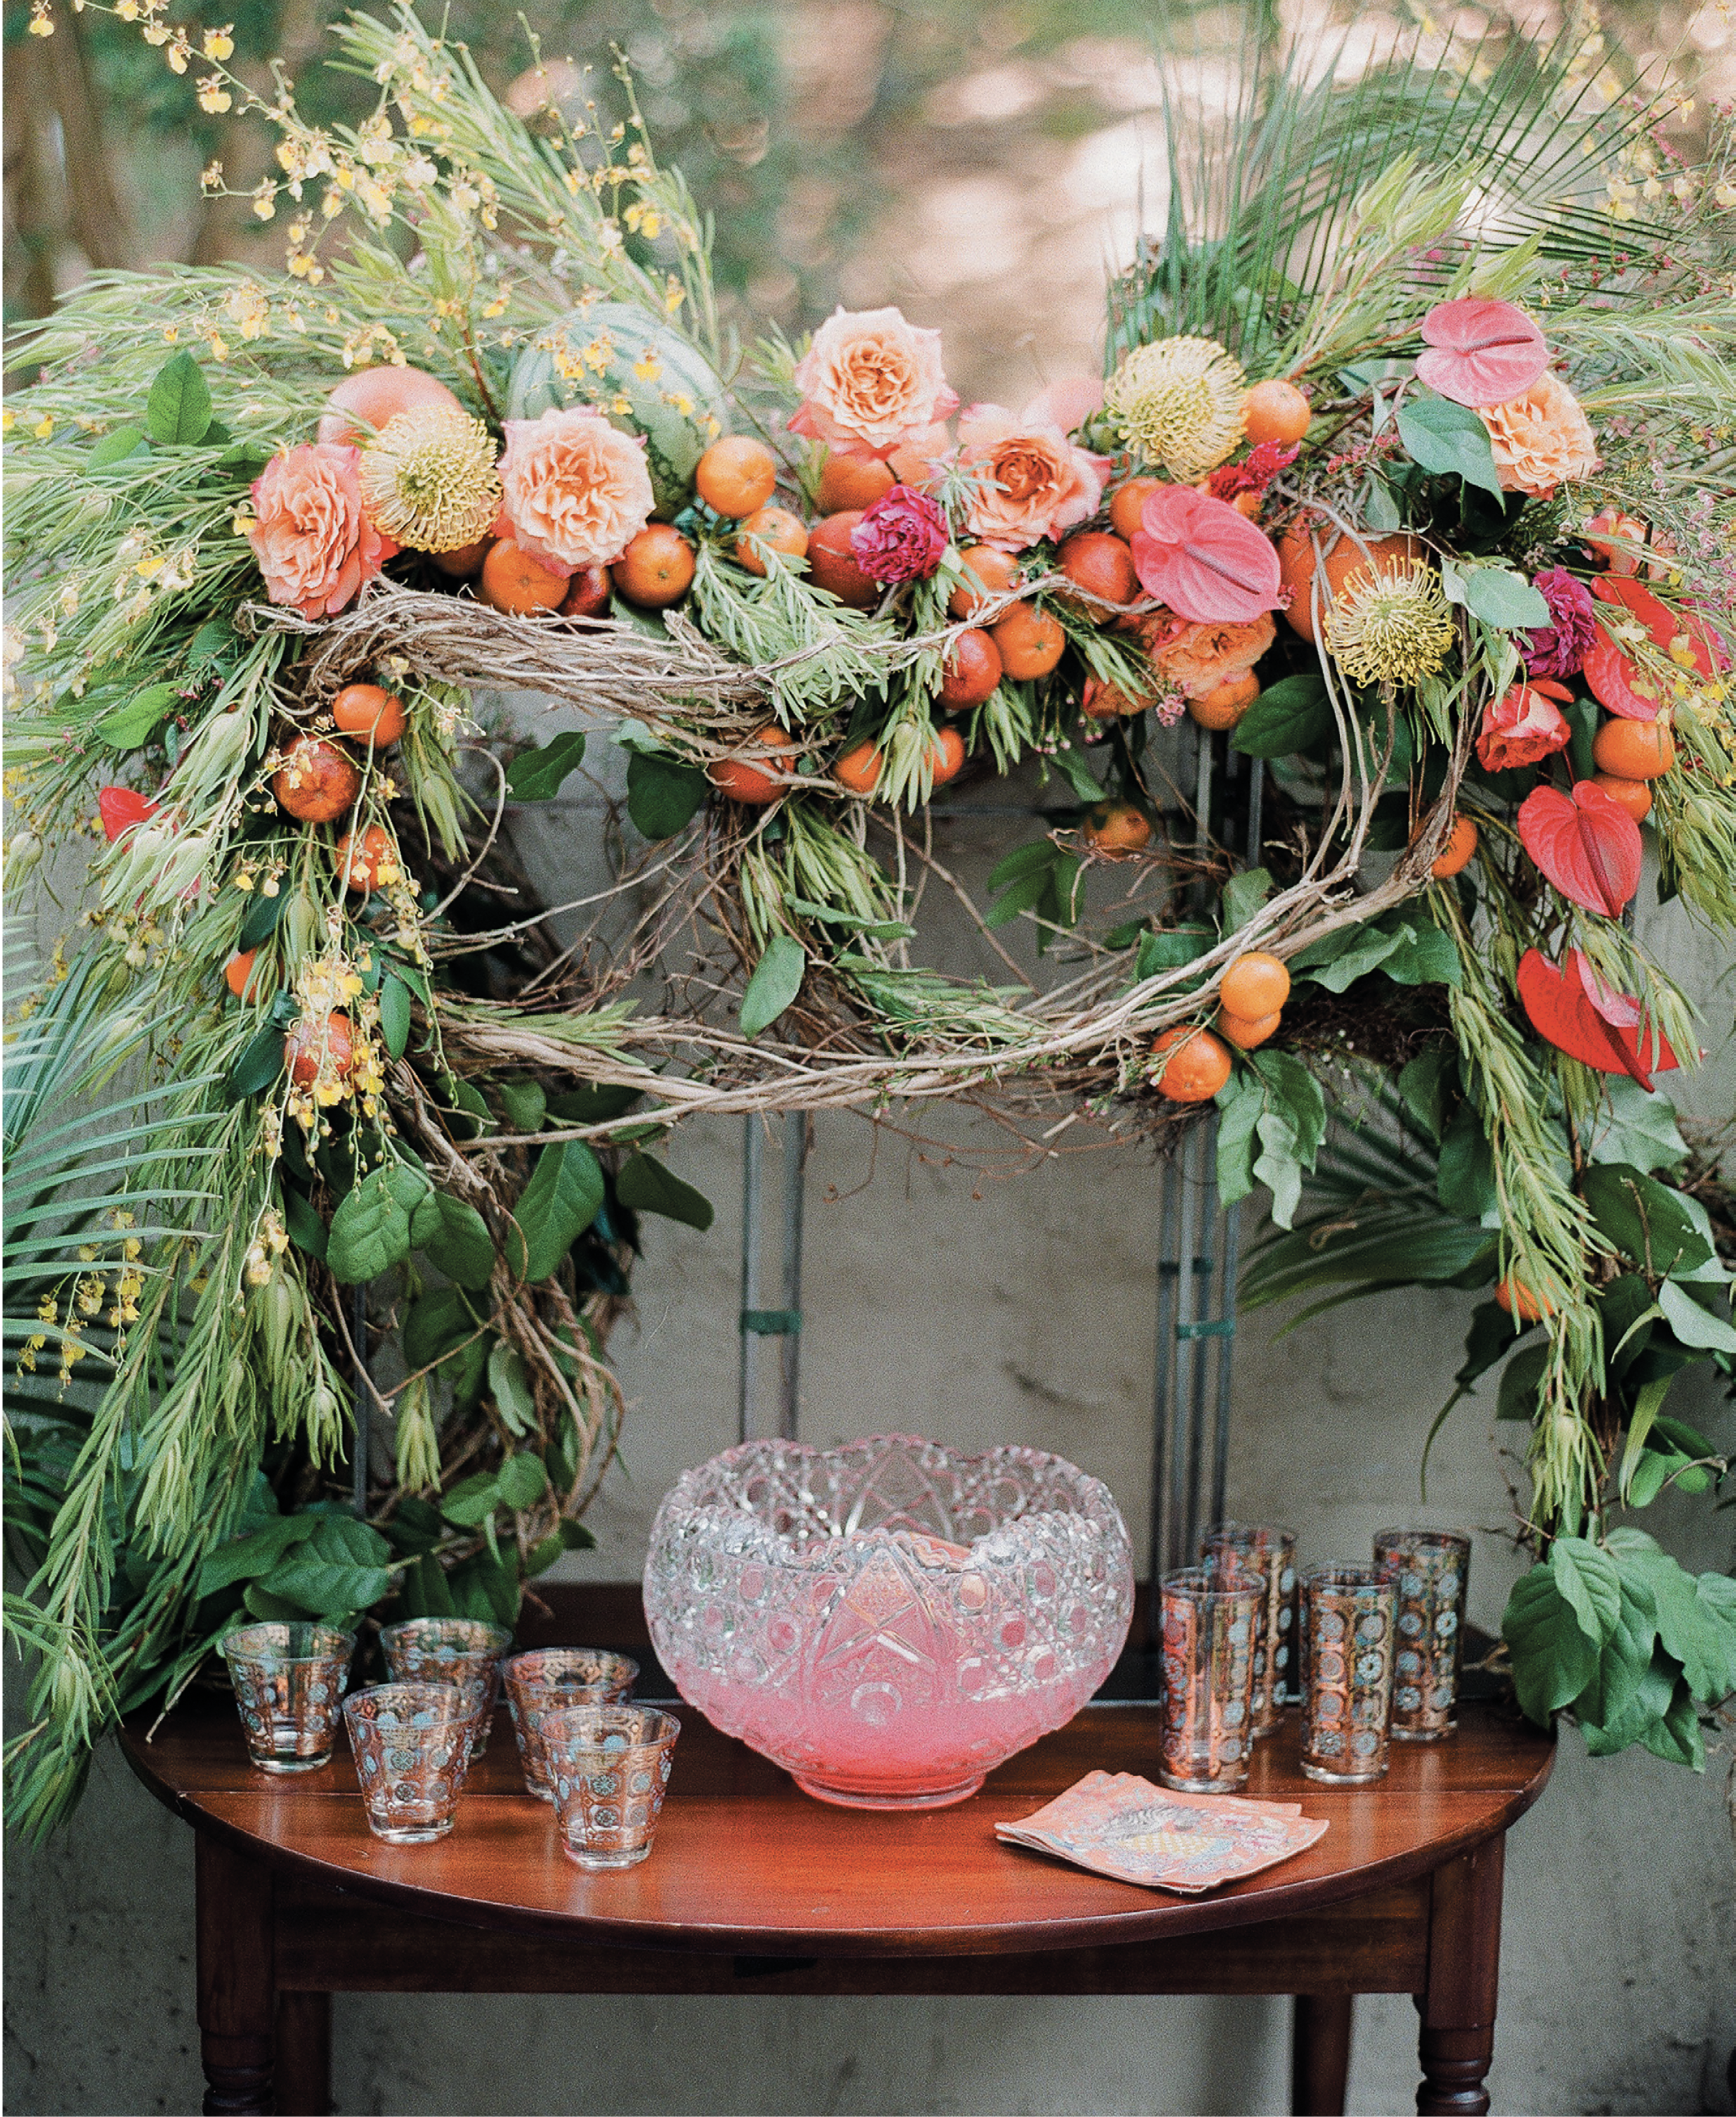 Wimberly Fair created the wow-factor floral and fruit arbor surrounding the punch table.